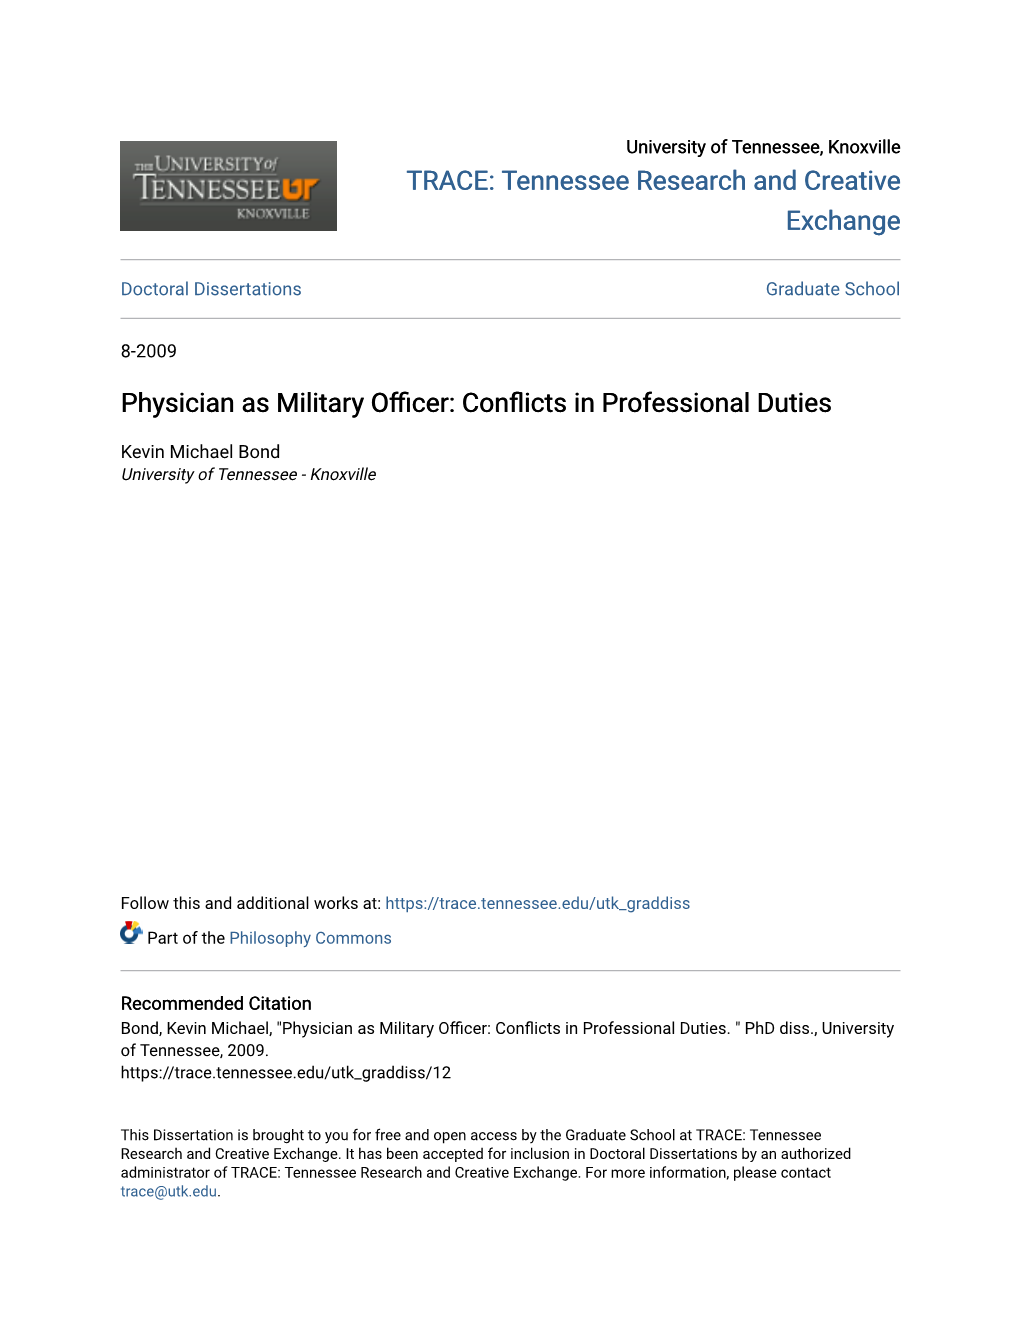 Physician As Military Officer: Conflicts Inof Pr Essional Duties